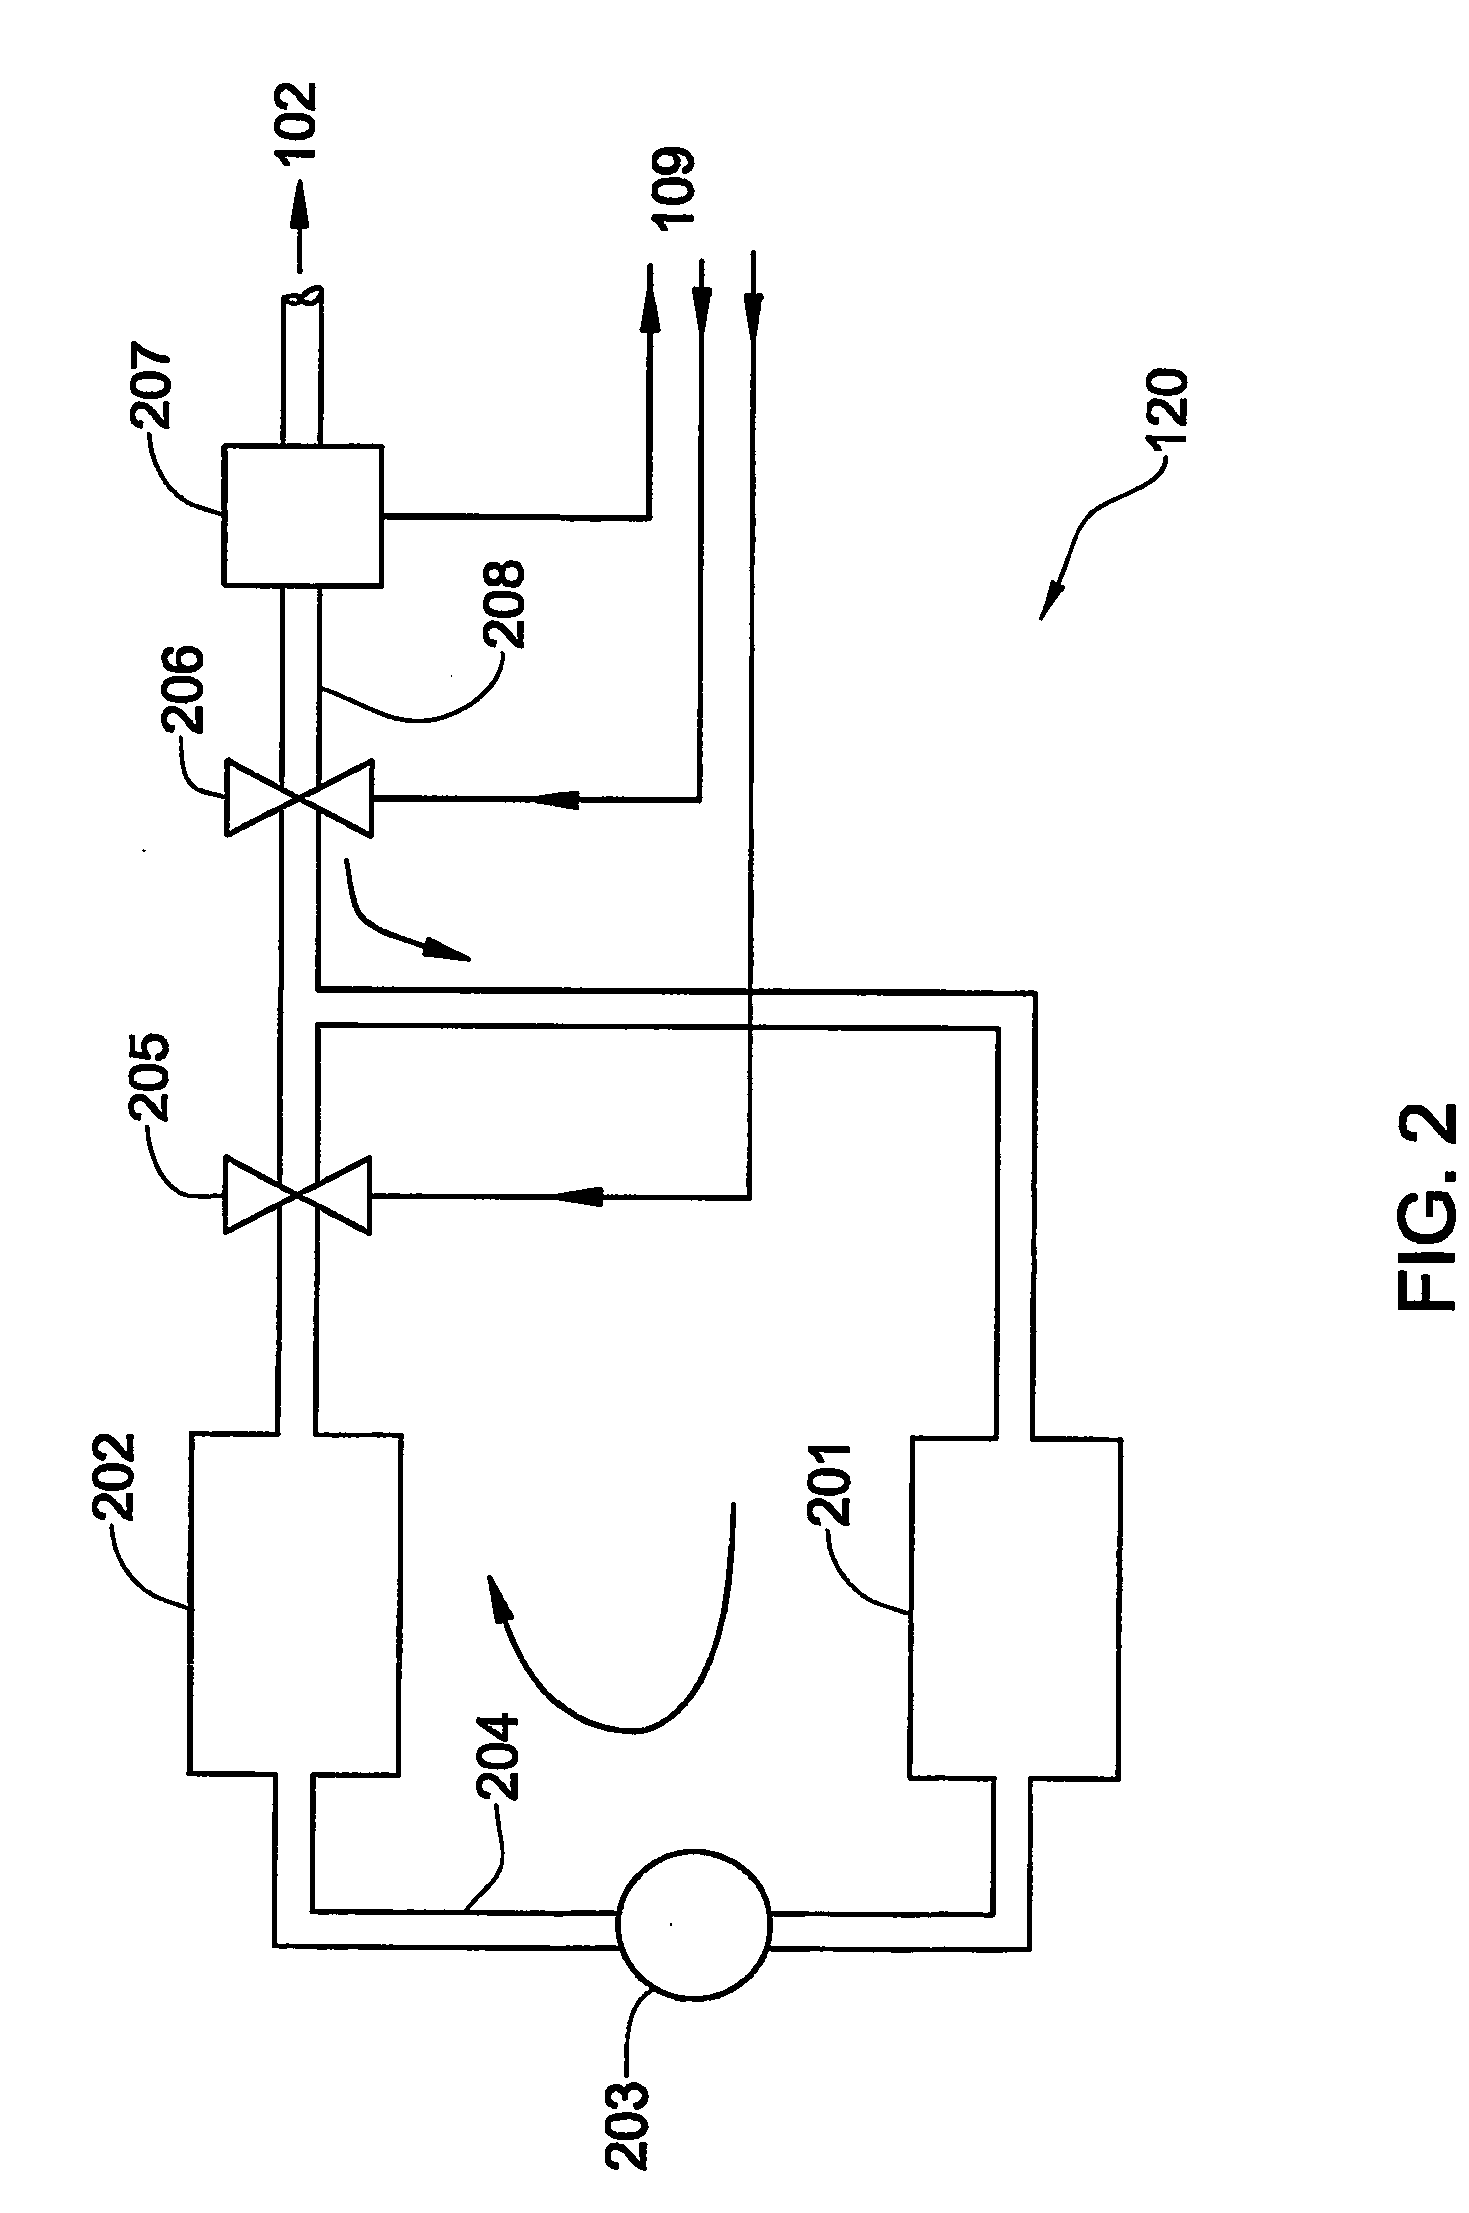 System and process for controllable preparation of glass-coated microwires